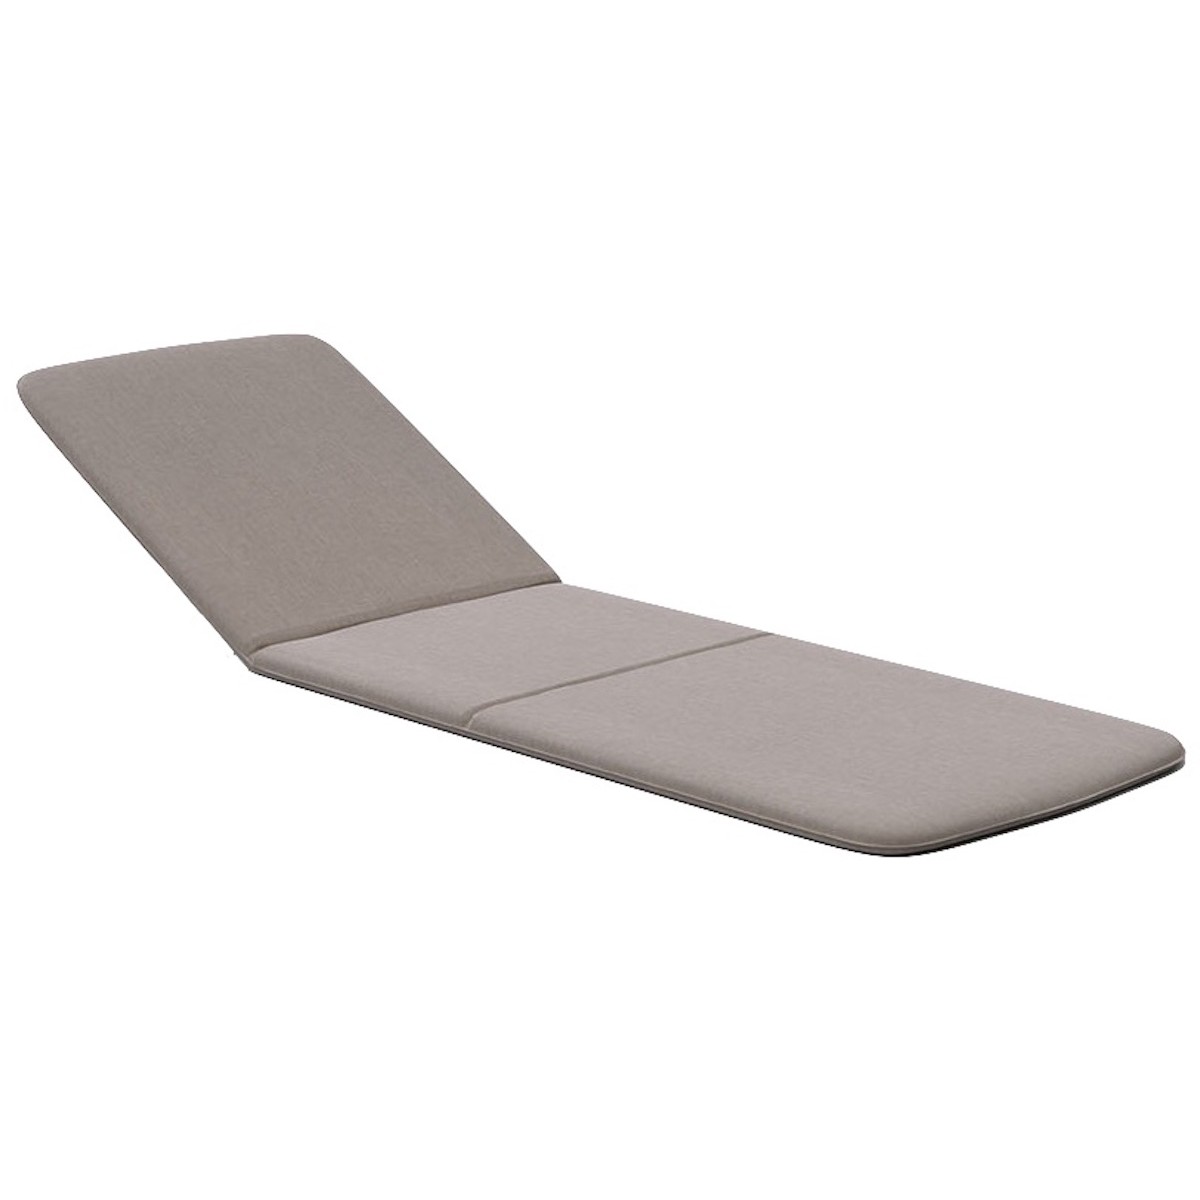 Ash Heritage – Cushion for MOLO Sunbed